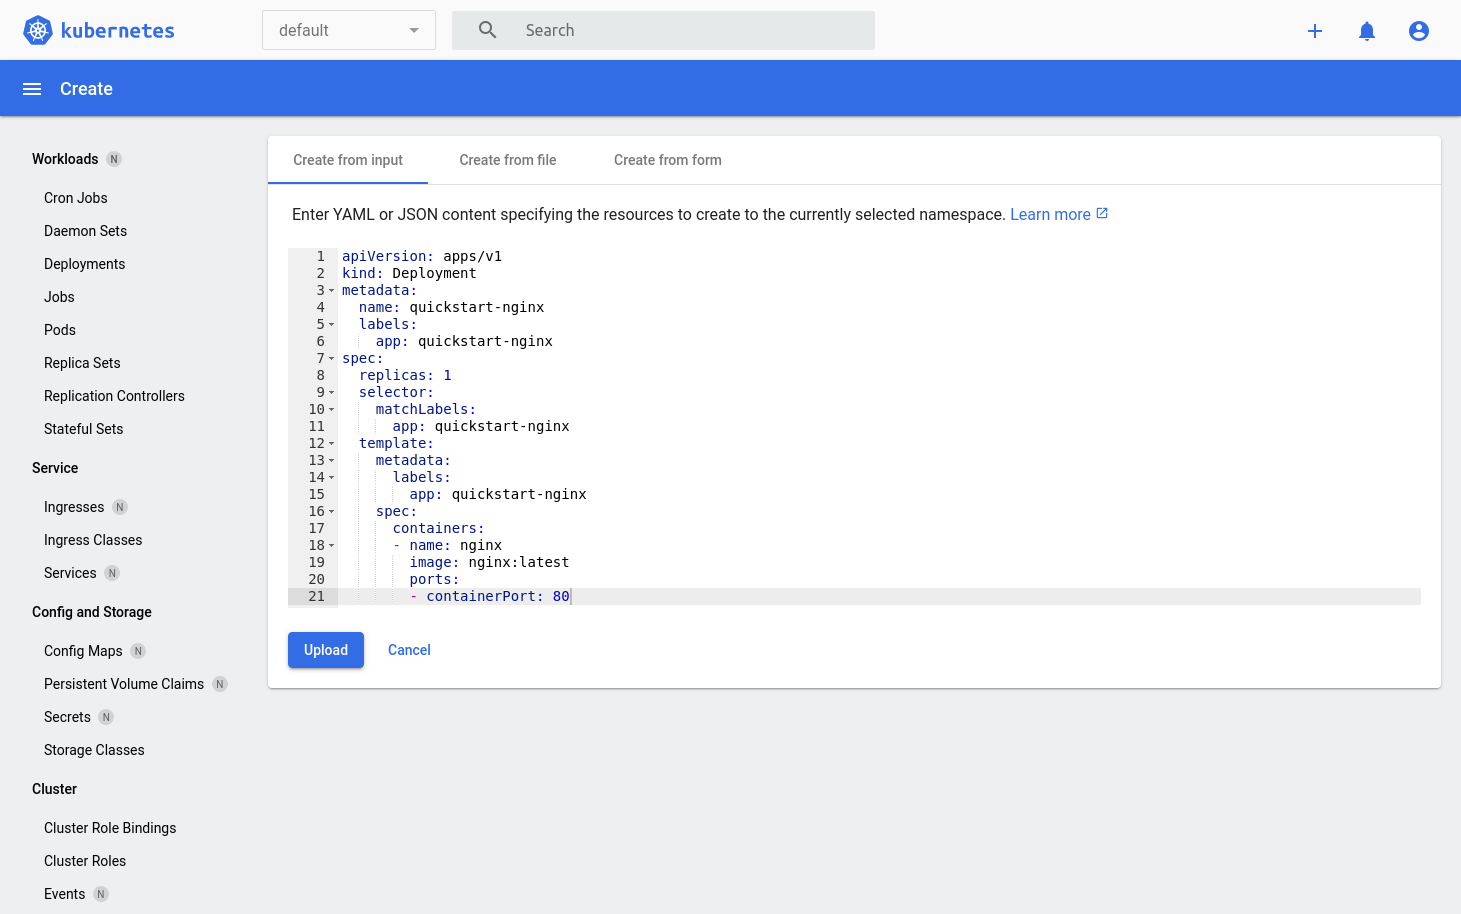 ../_images/kubernetes-create-new-resource-page.png